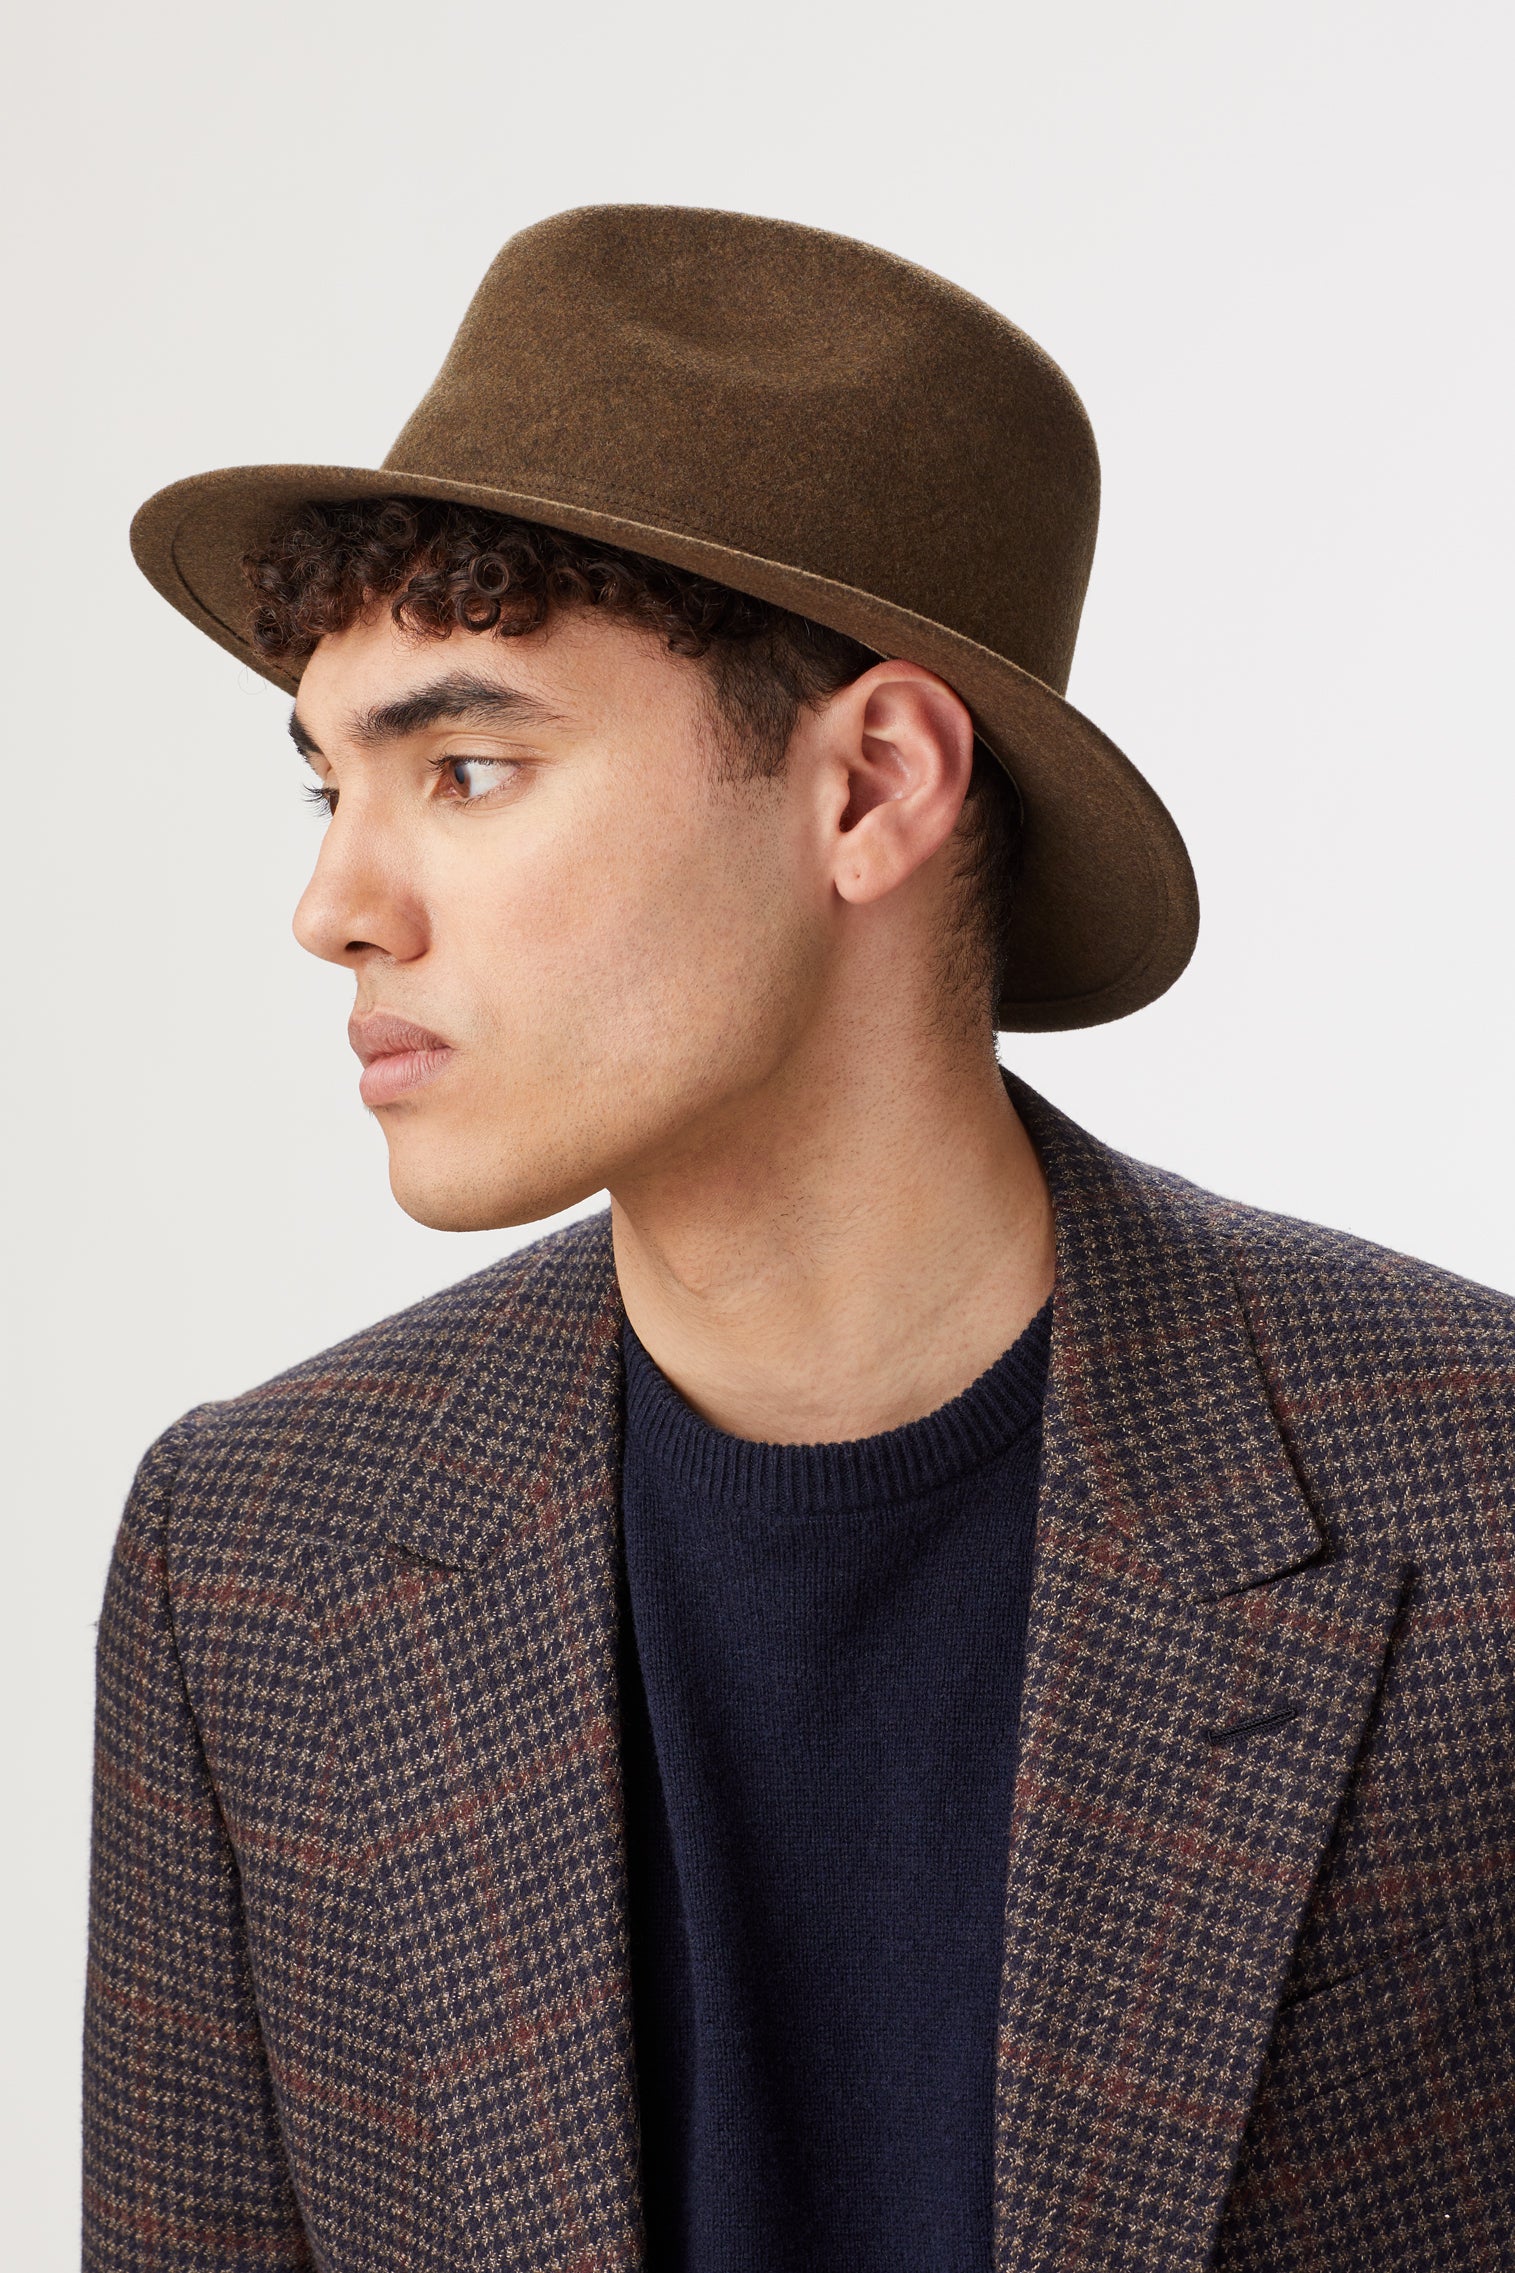 Rambler Rollable Trilby - Father's Day Gift Guide - Lock & Co. Hatters London UK